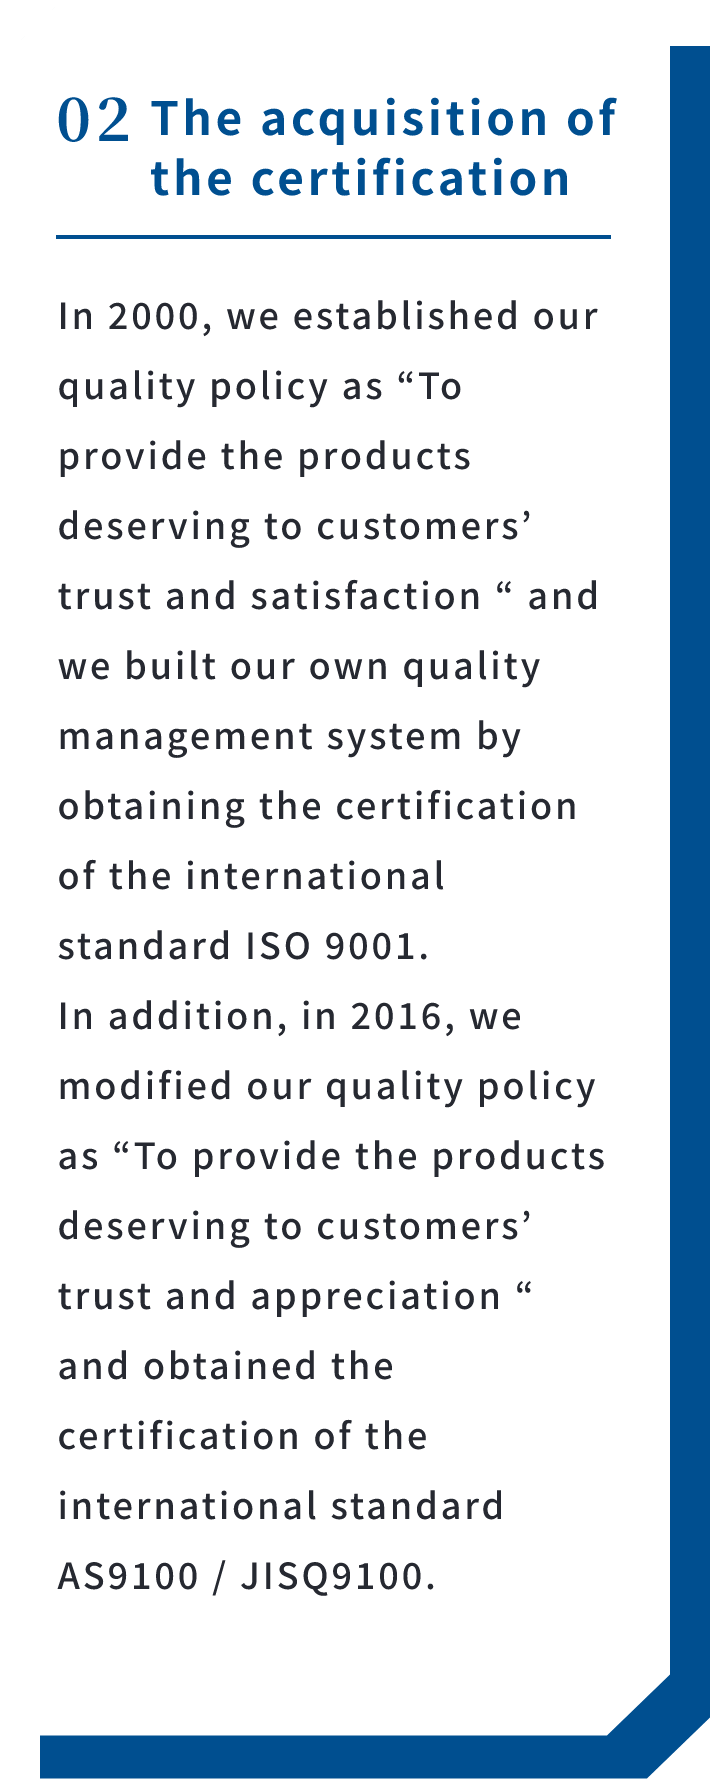 02 The acquisition of the certification